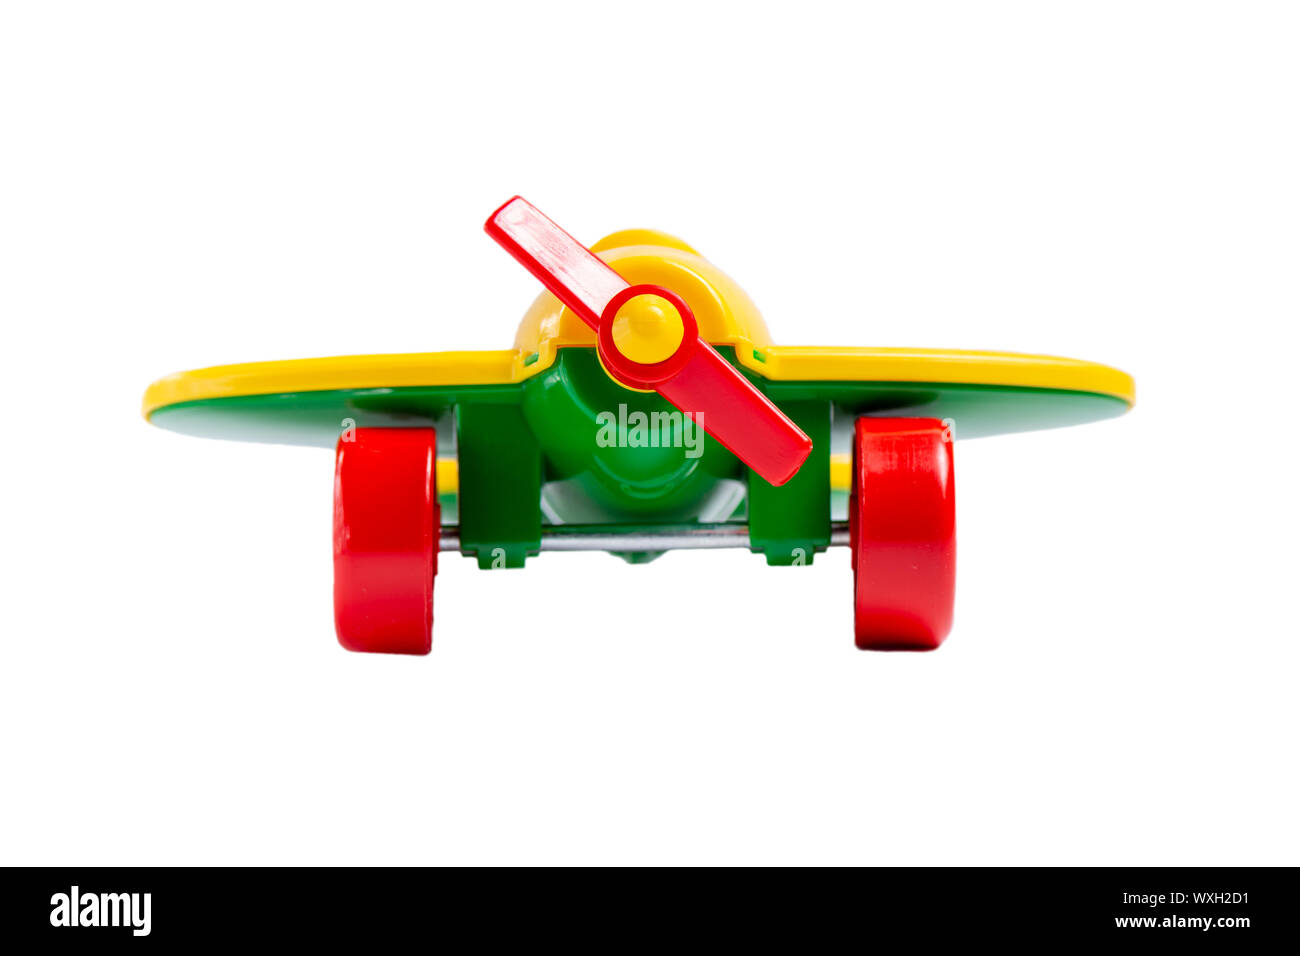 yellow toy airplane with propeller and landing gear isolate on a white  background without shadow. concept of travel and flight Stock Photo - Alamy